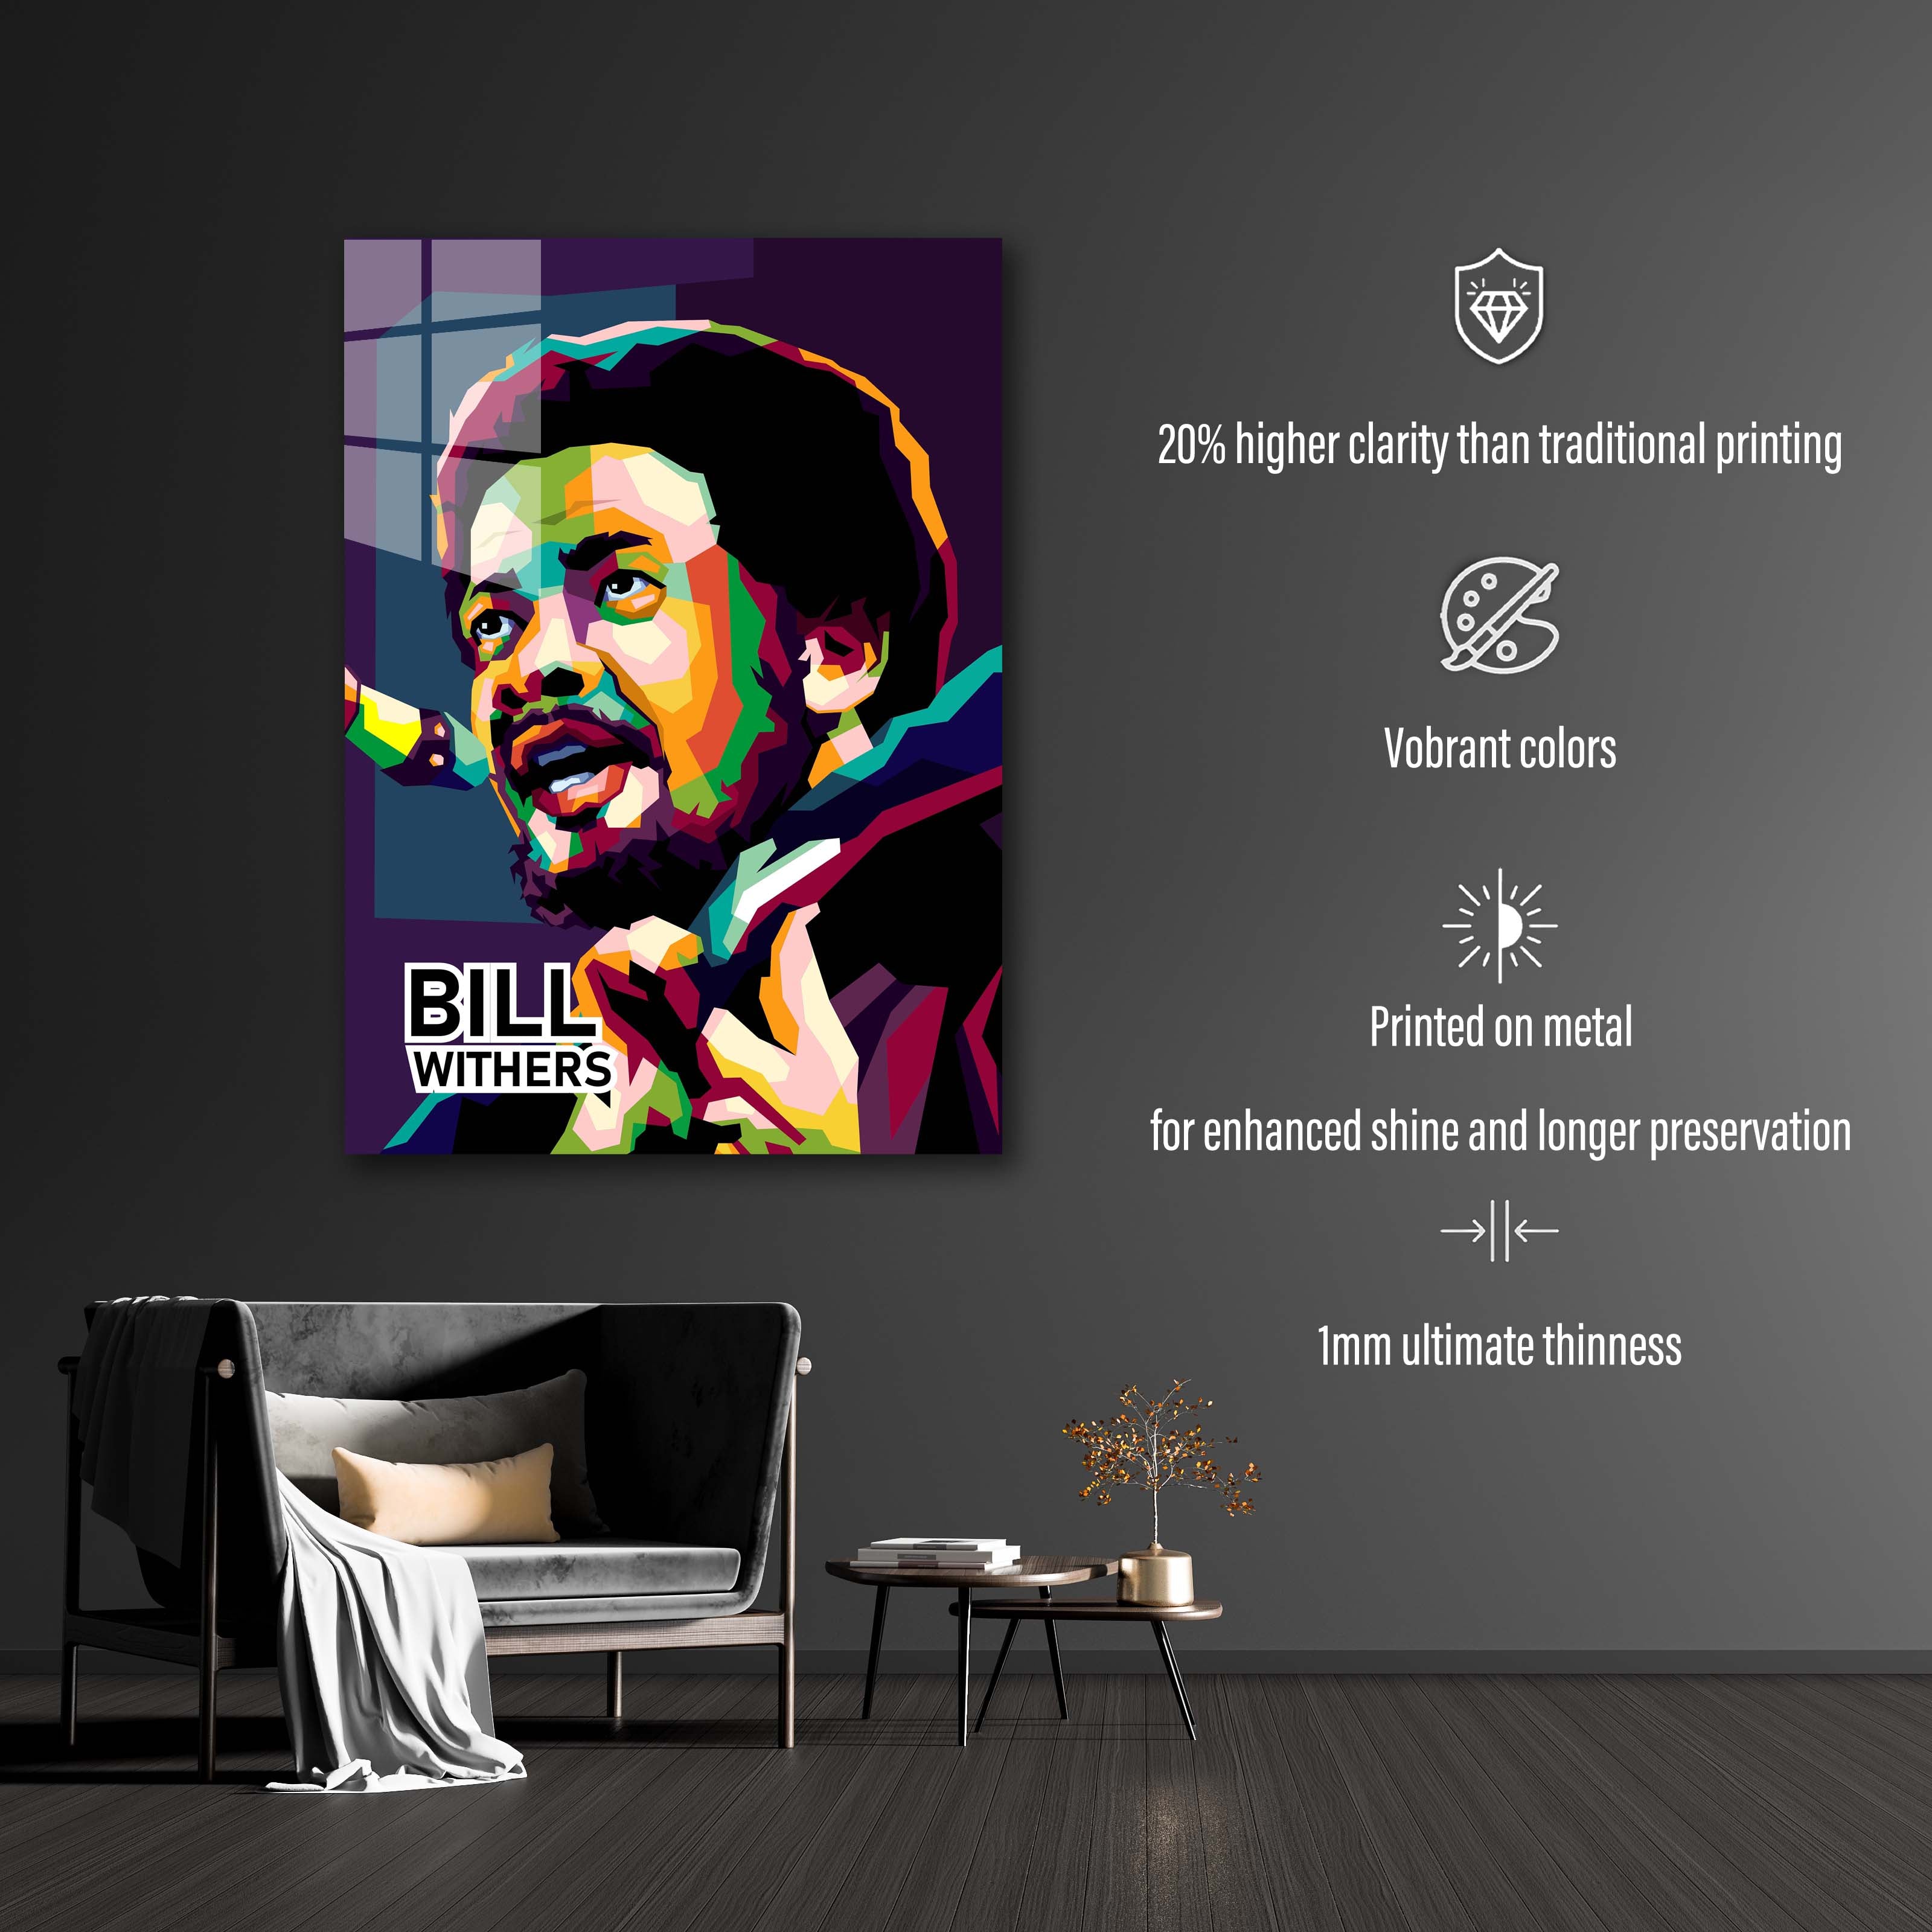 Bill Withers in amazing wpap pop art-designed by @Amirudin kosong enam